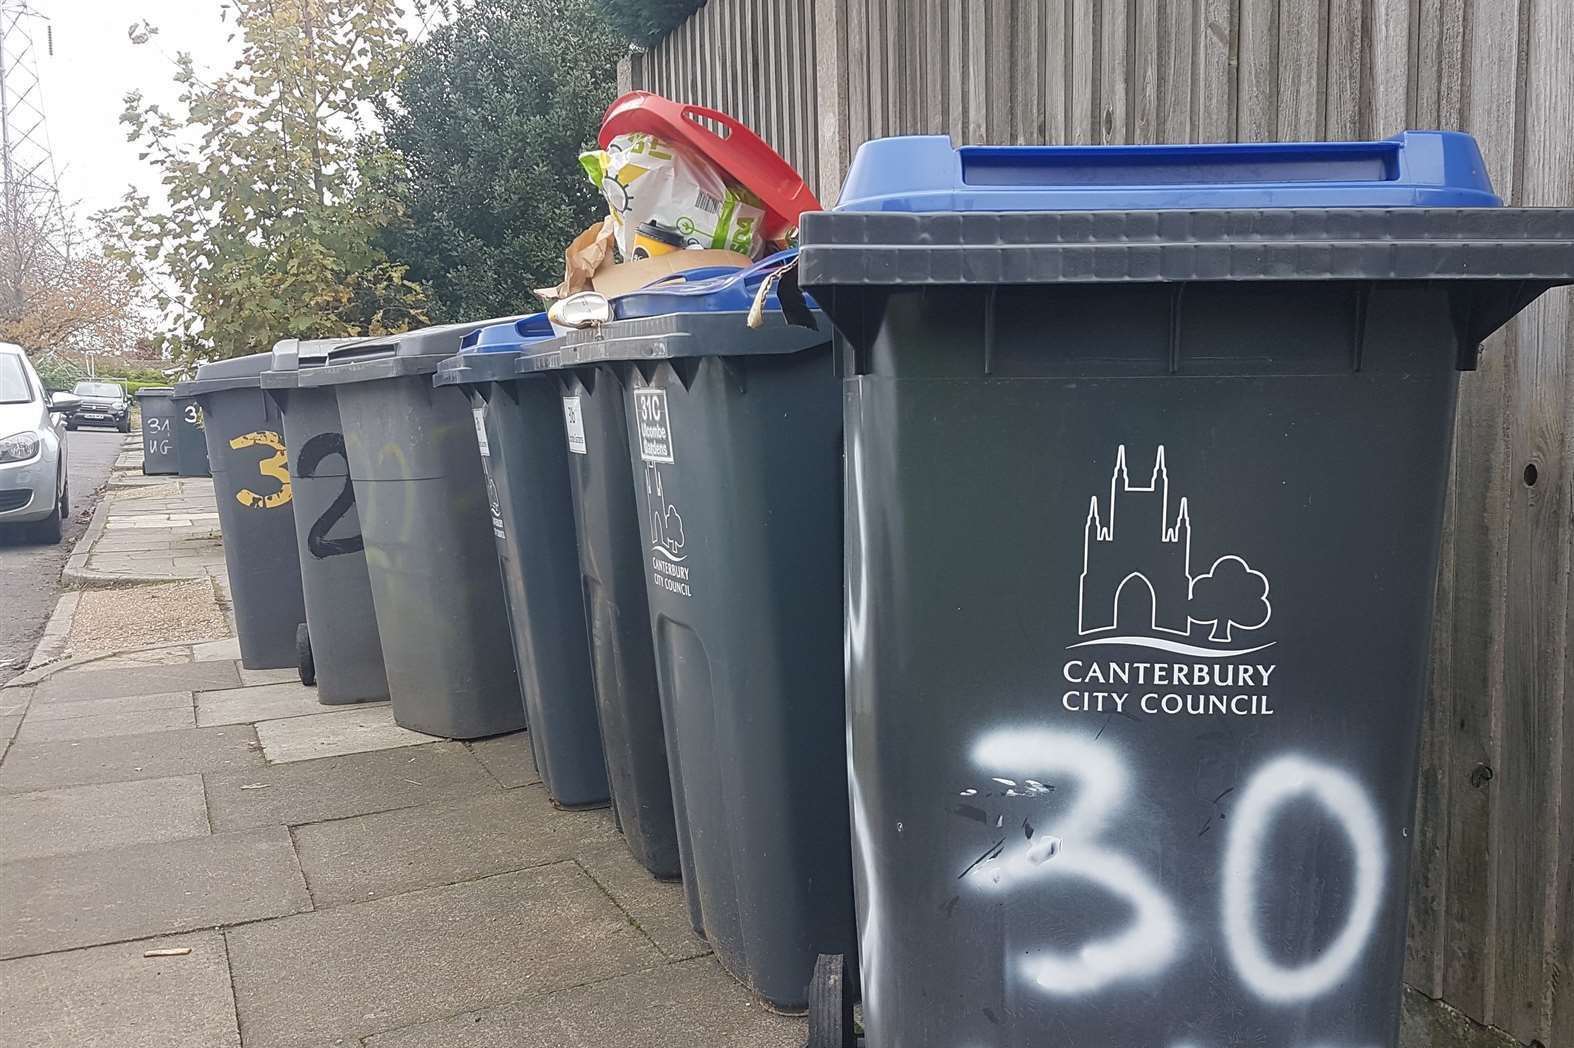 Bin strikes started in Canterbury Wednesday, July 5